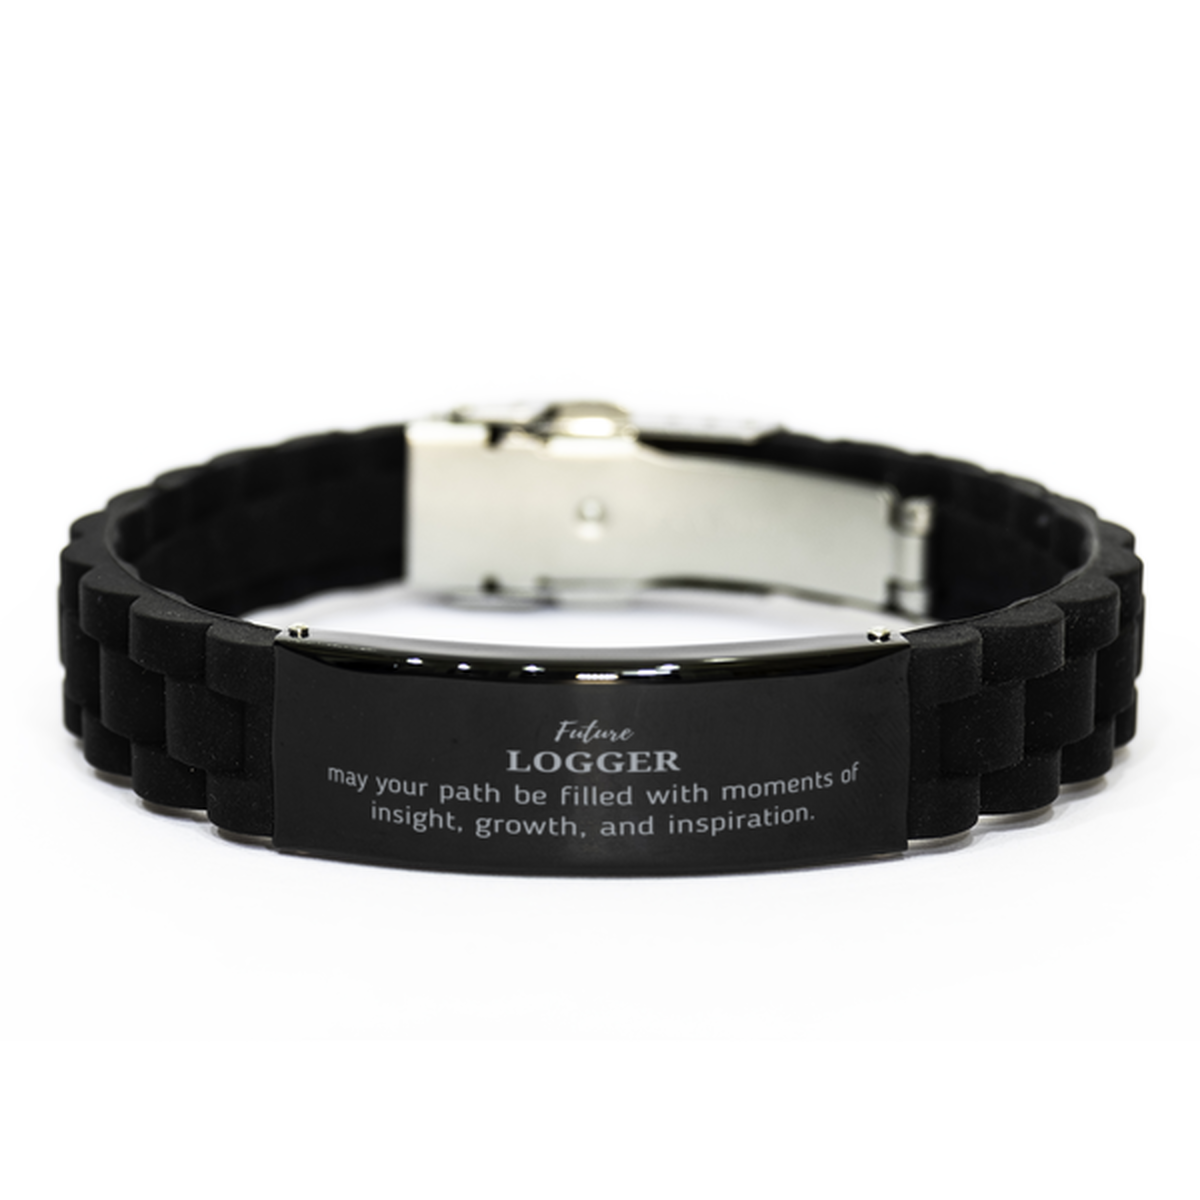 Future Logger Gifts, May your path be filled with moments of insight, Graduation Gifts for New Logger, Christmas Unique Black Glidelock Clasp Bracelet For Men, Women, Friends